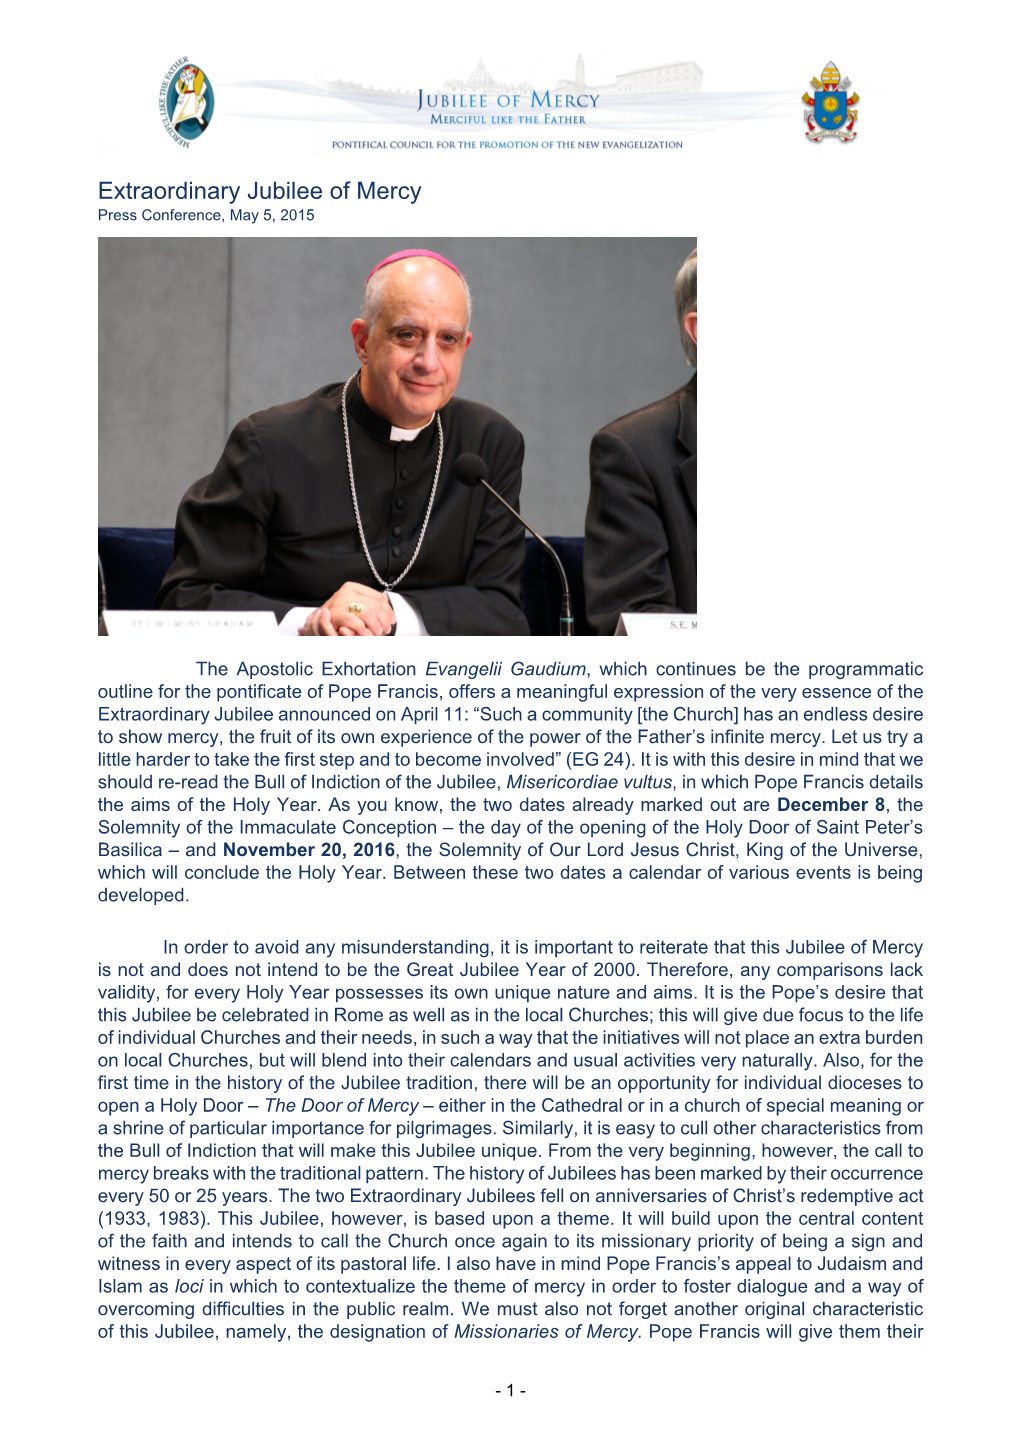 Extraordinary Jubilee of Mercy Press Conference, May 5, 2015